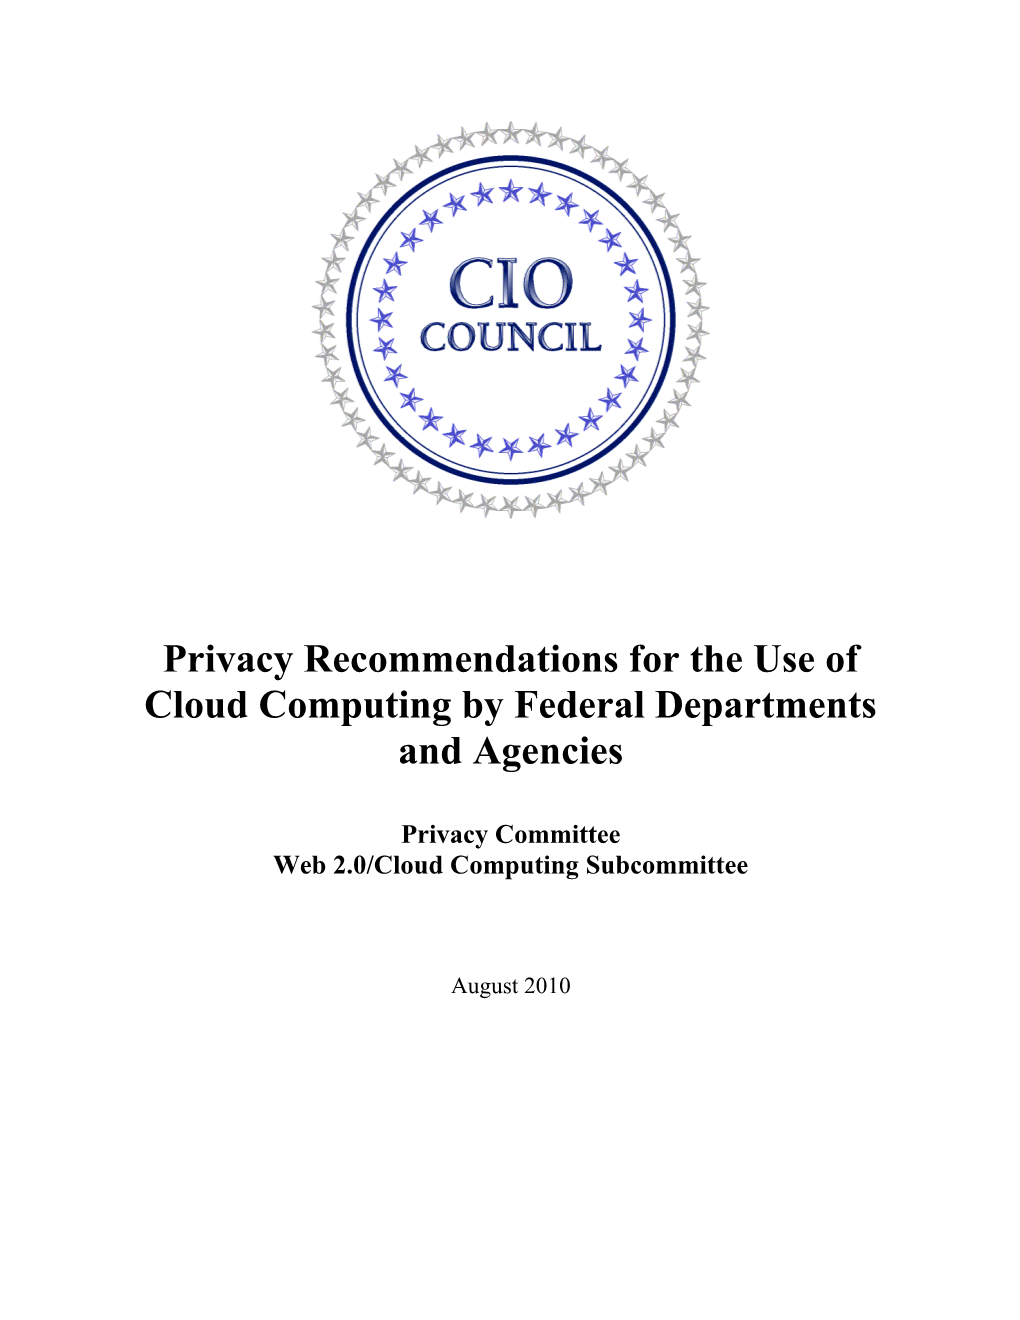 Privacy Recommendations for the Use of Cloud Computing by Federal Departments and Agencies